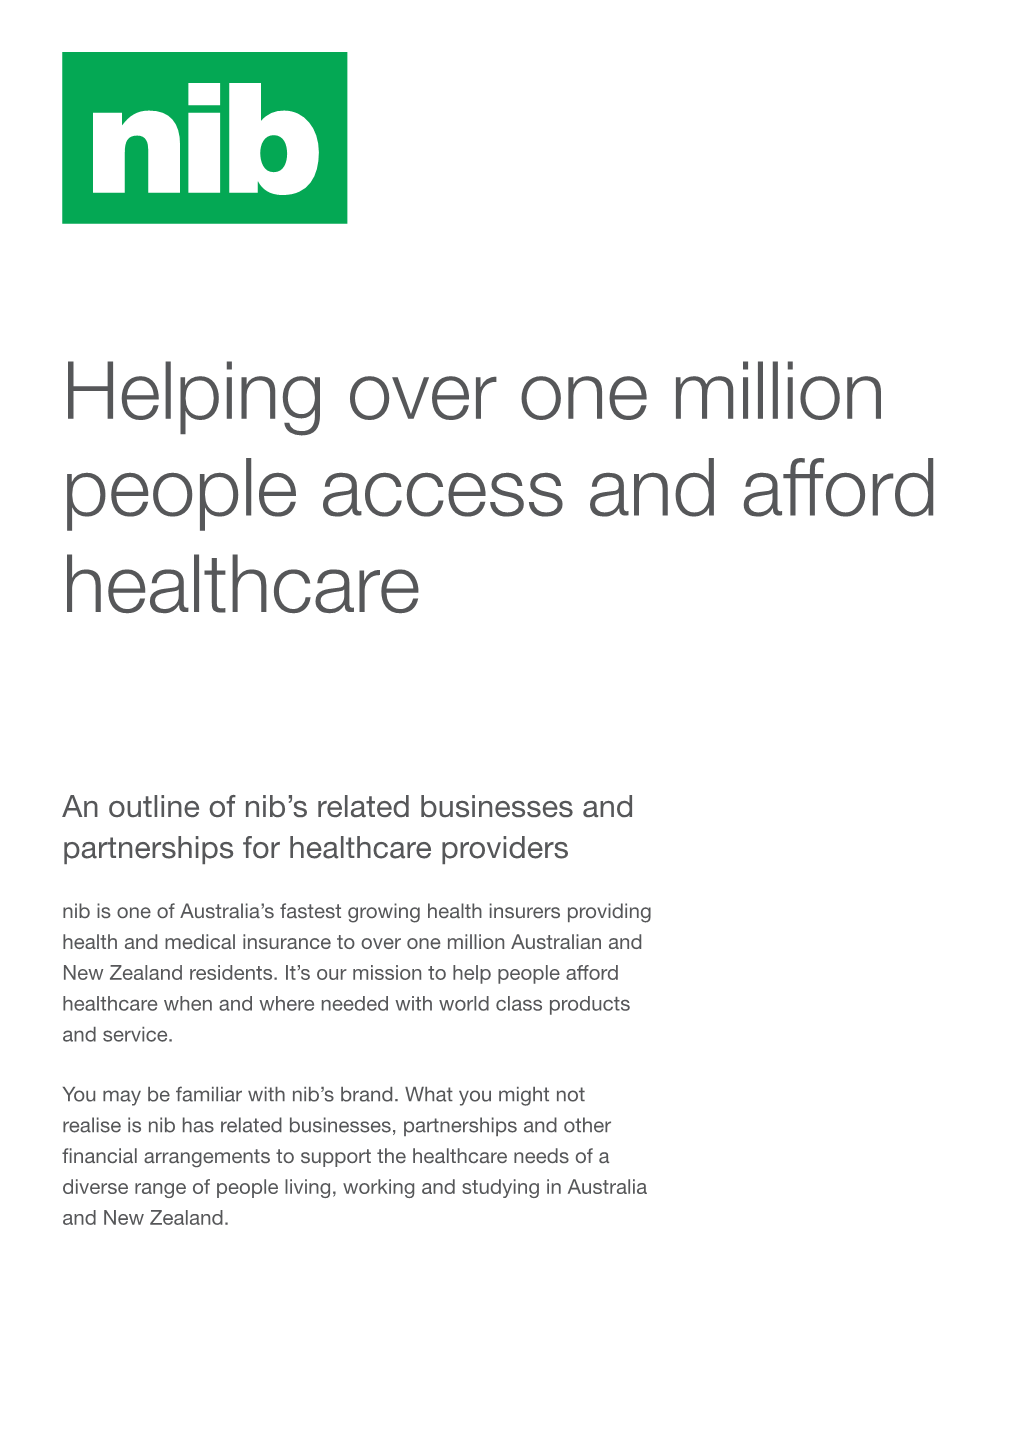 Helping Over One Million People Access and Afford Healthcare